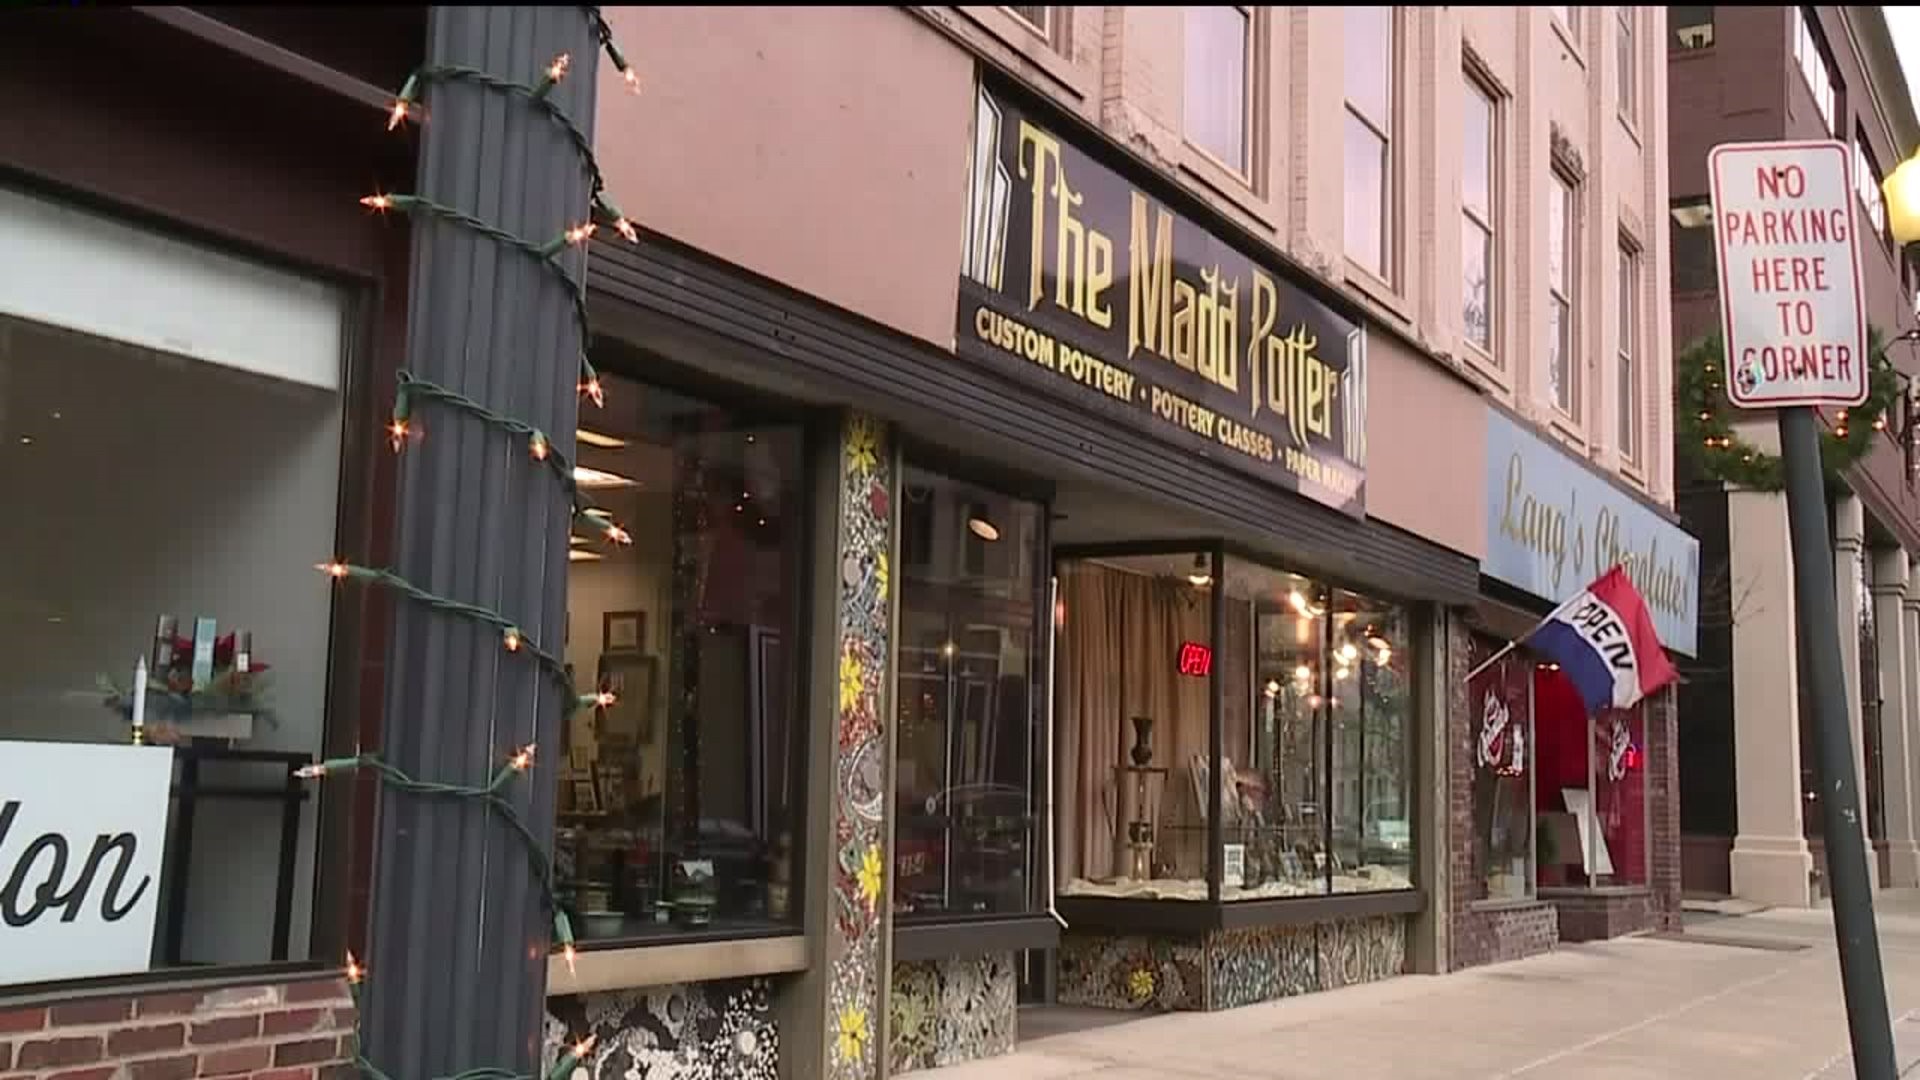 Holiday Shopping Downtown in Williamsport